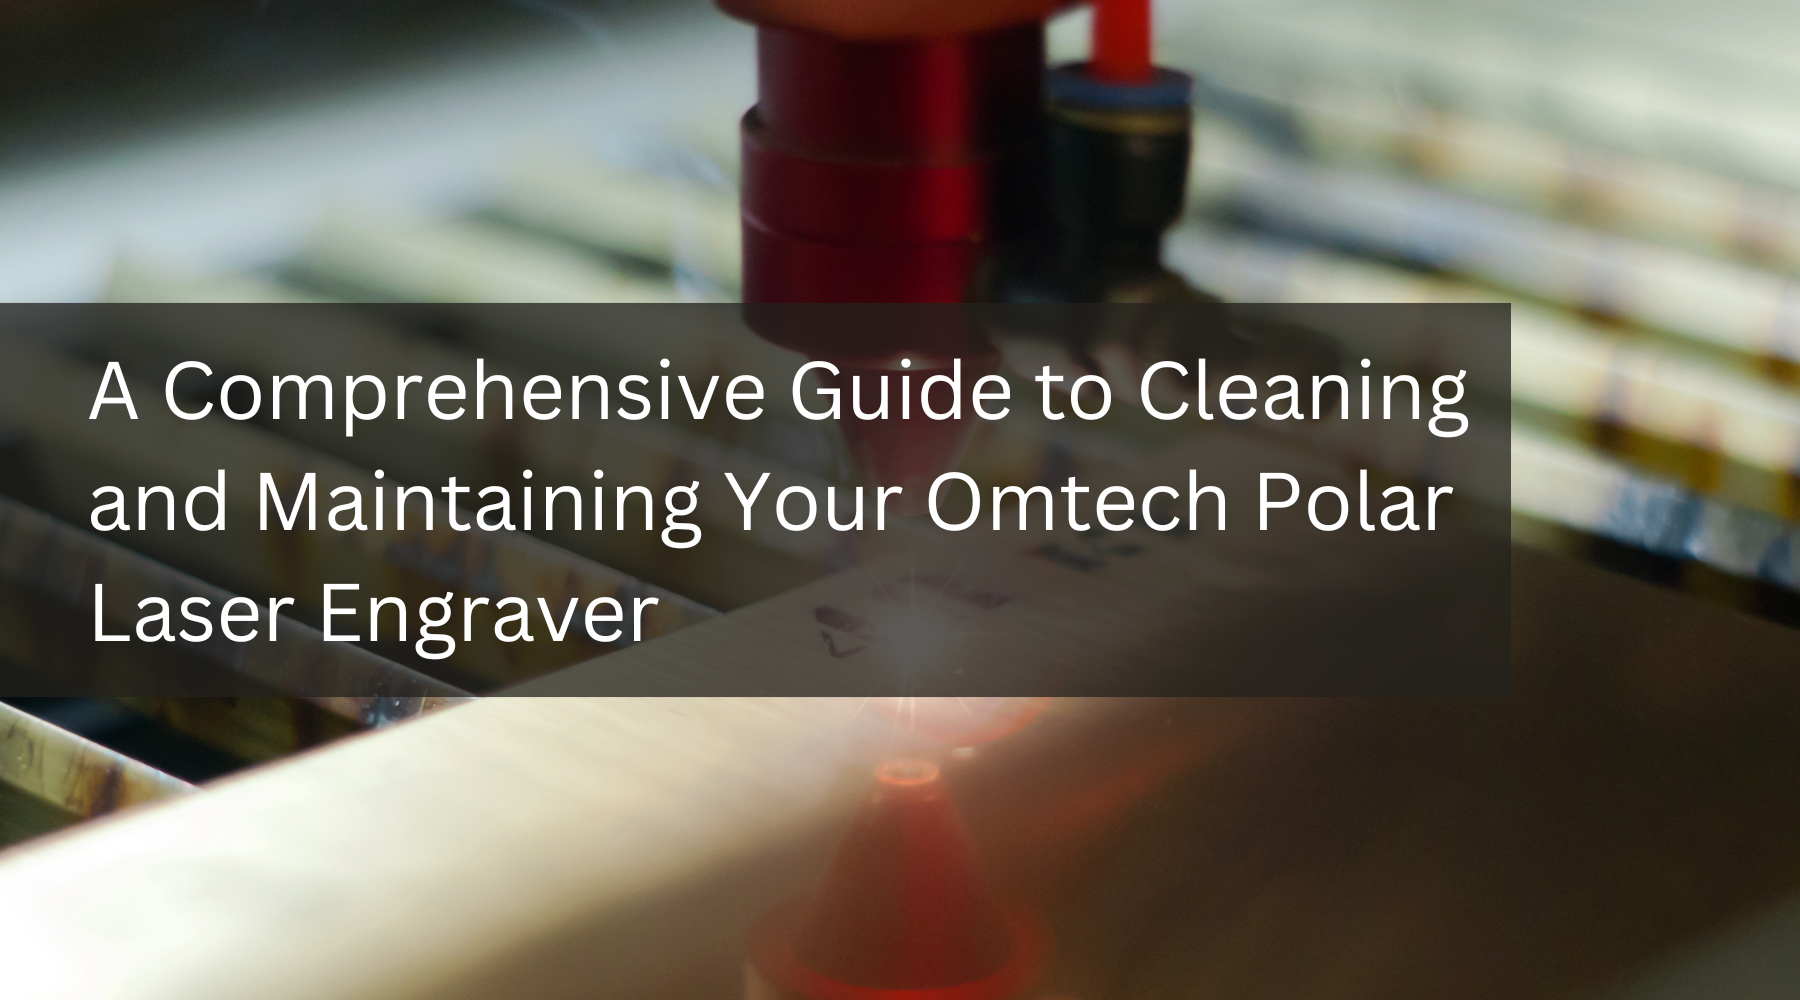 A Comprehensive Guide to Cleaning and Maintaining Your Omtech Polar Laser Engraver